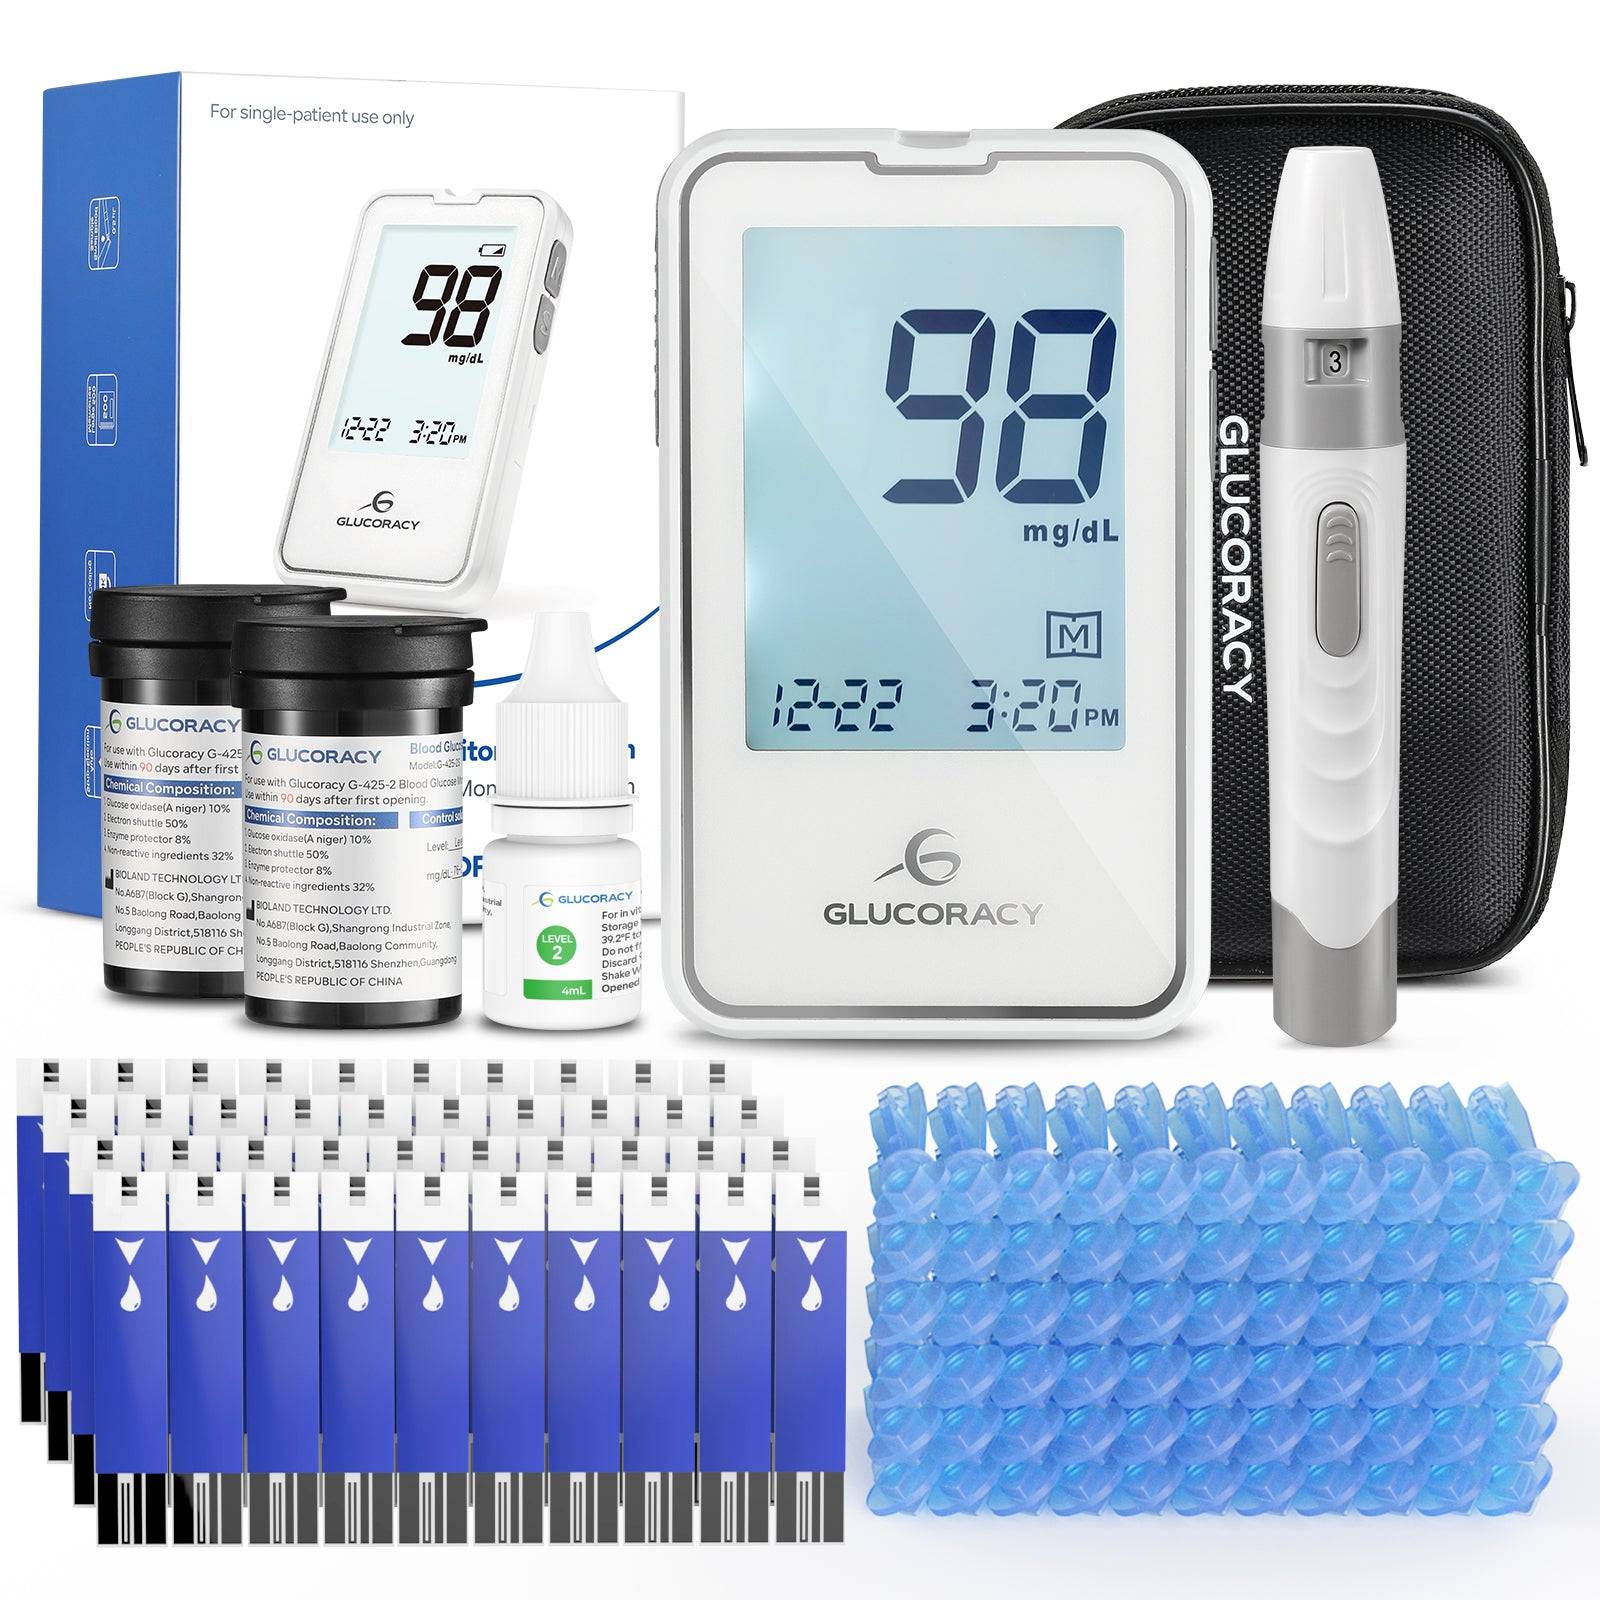 Glucoracy G-425-2 Glucose Monitor Plus Kit with Blood Control Solution 